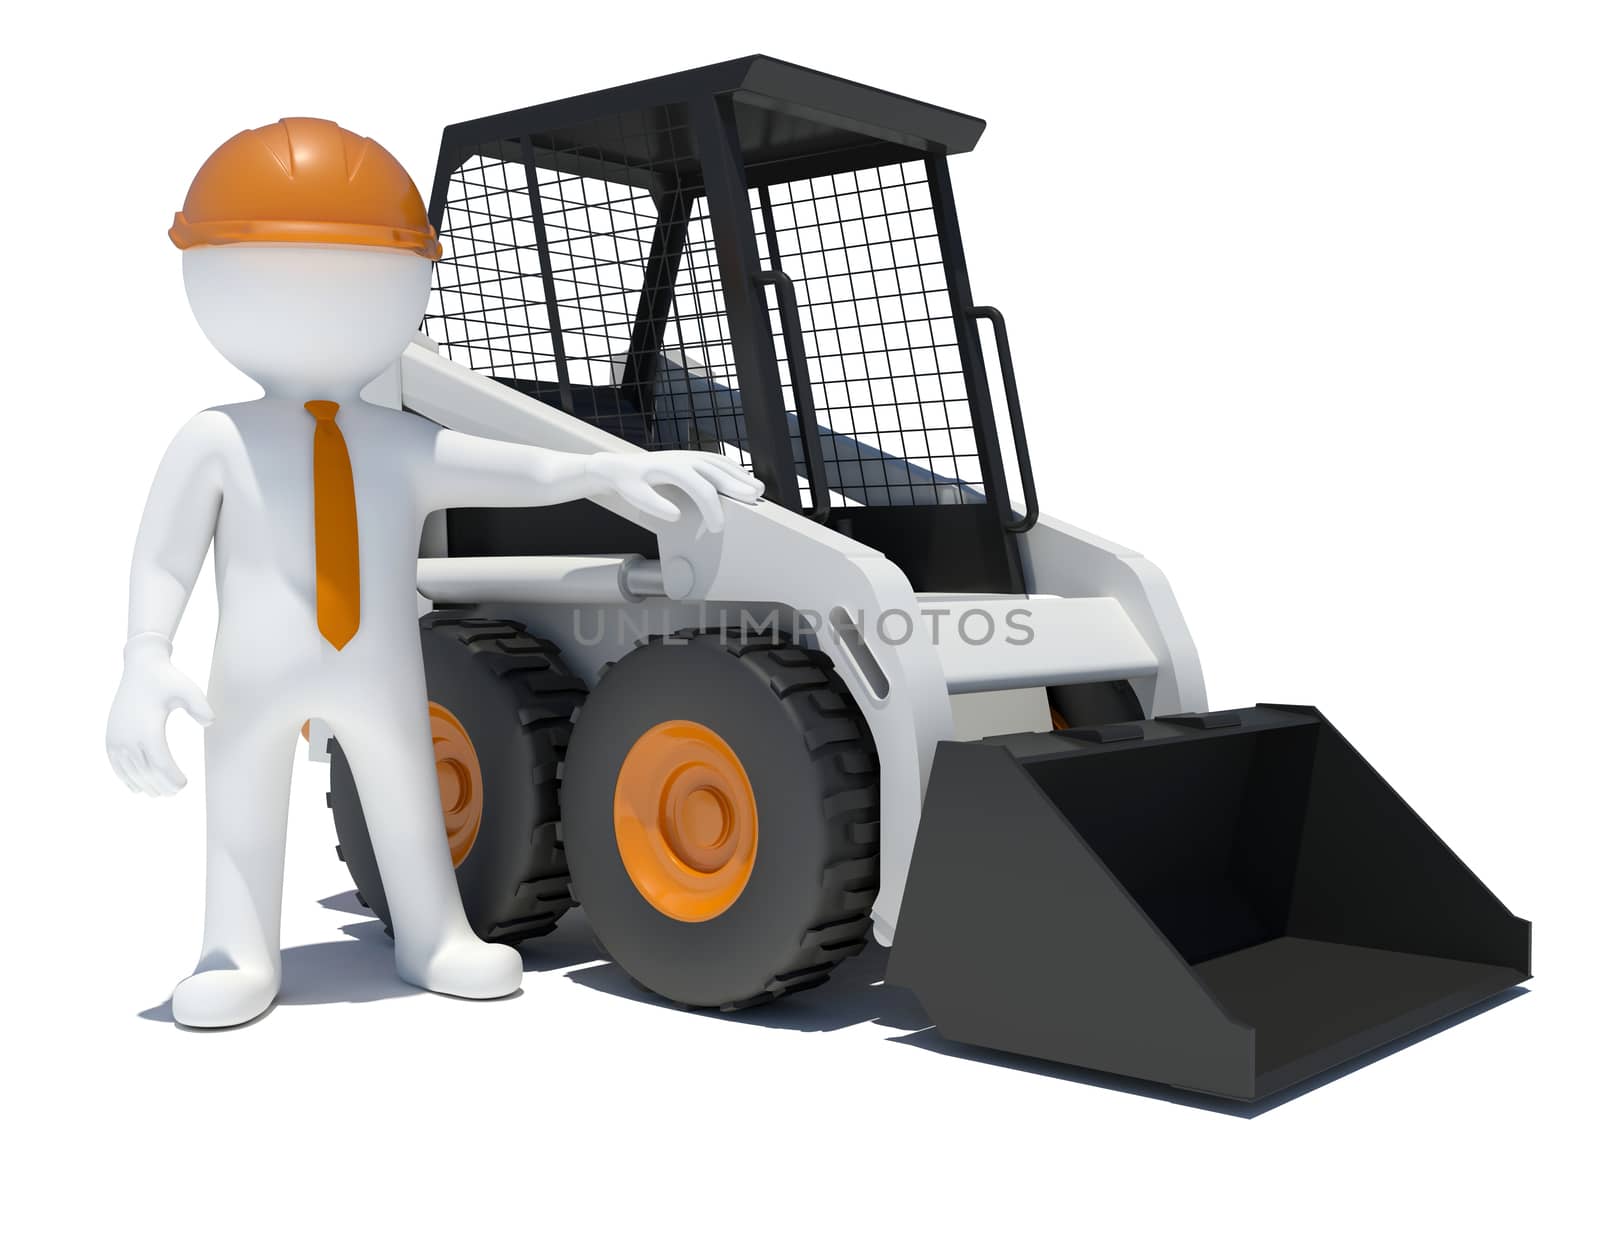 3d worker with construction loader. Isolated on white background